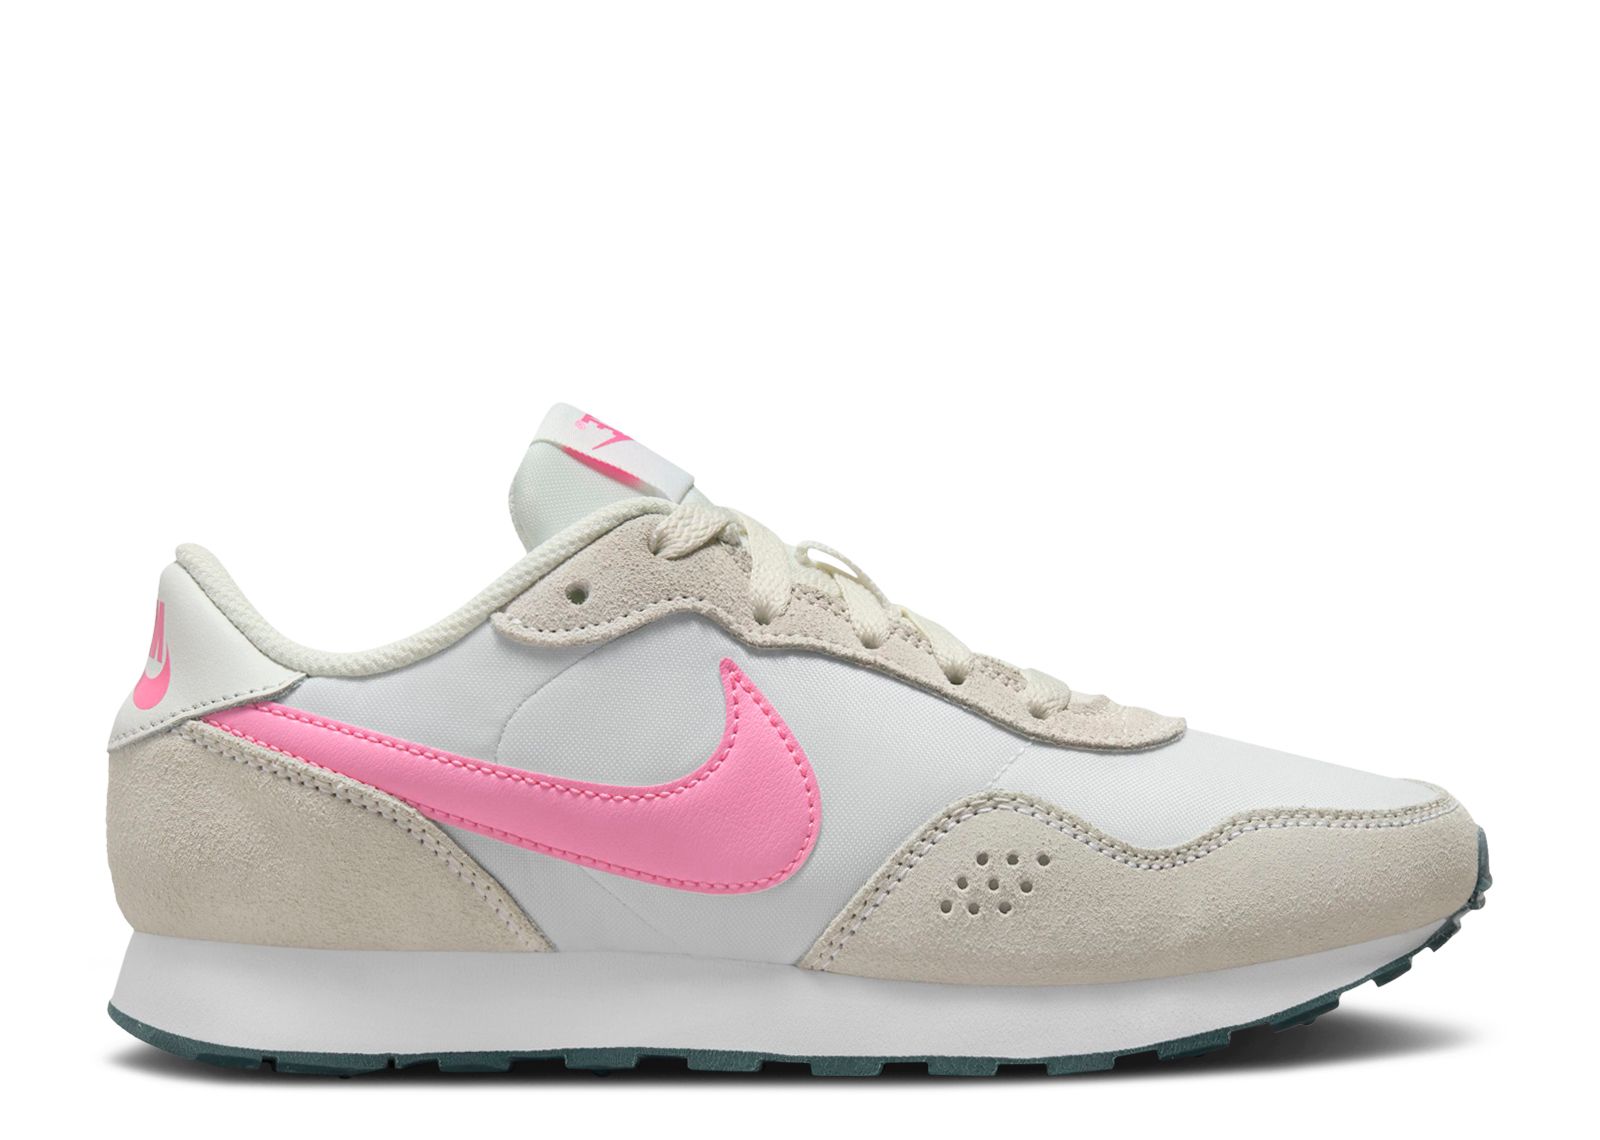 MD Valiant GS 111 Spell\' summit | Pink \'White white/white/geode - Club - teal/pink Flight Nike - CN8558 spell